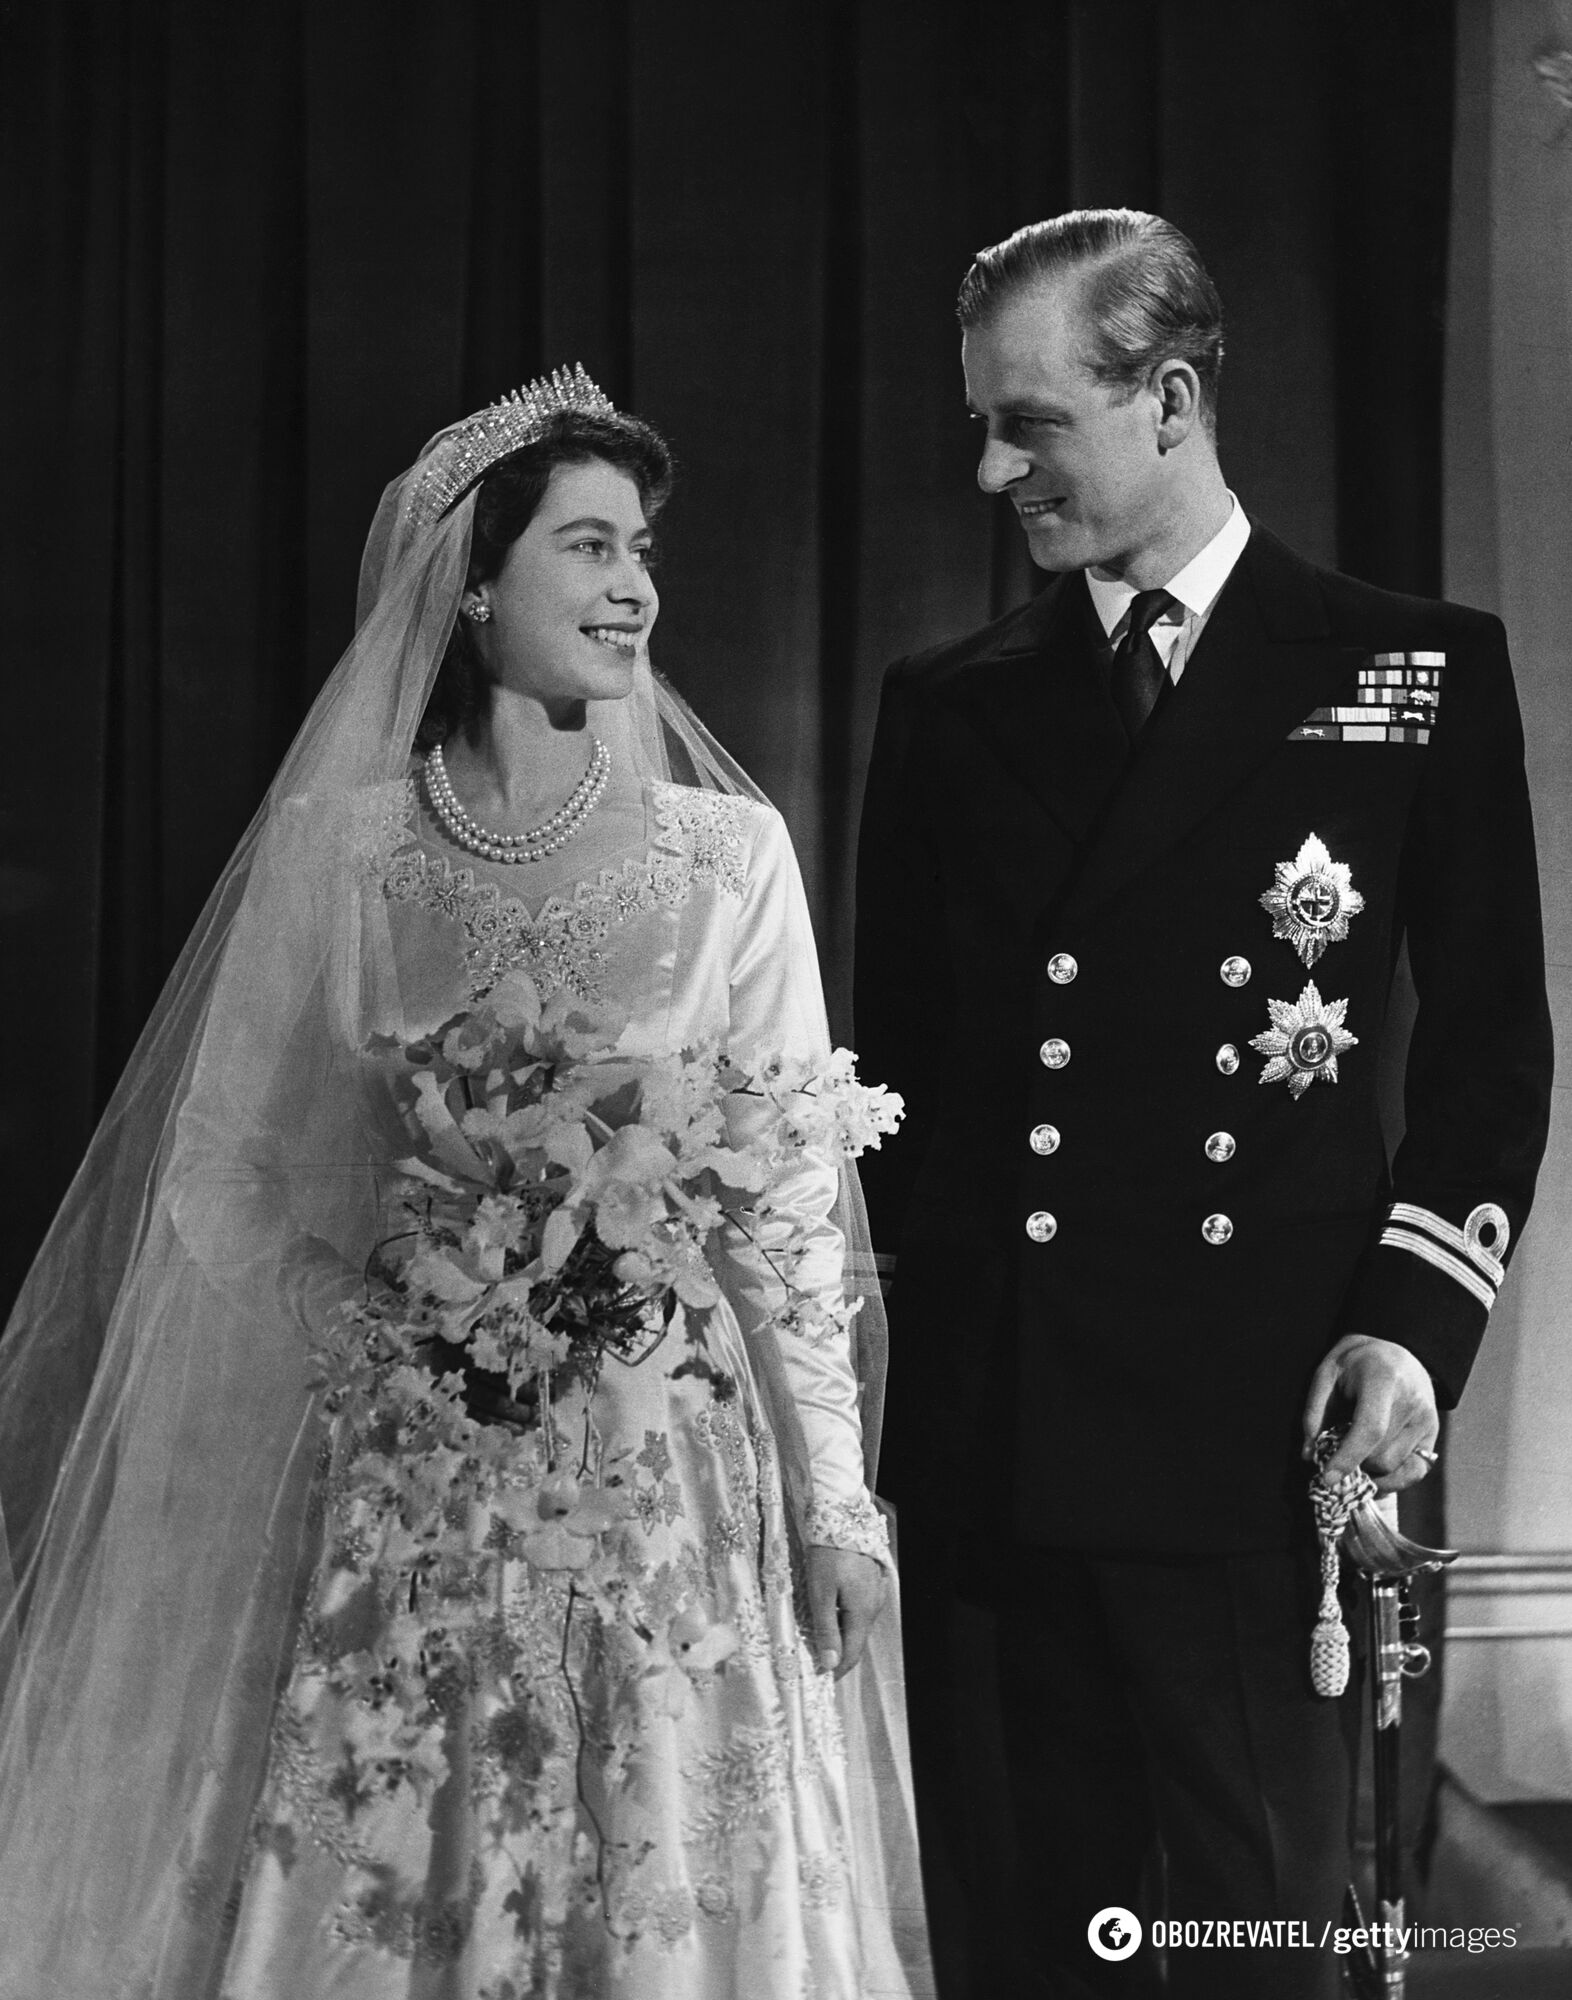 A ring that was too small, a split tiara, and more: 5 troubles that happened at royal weddings